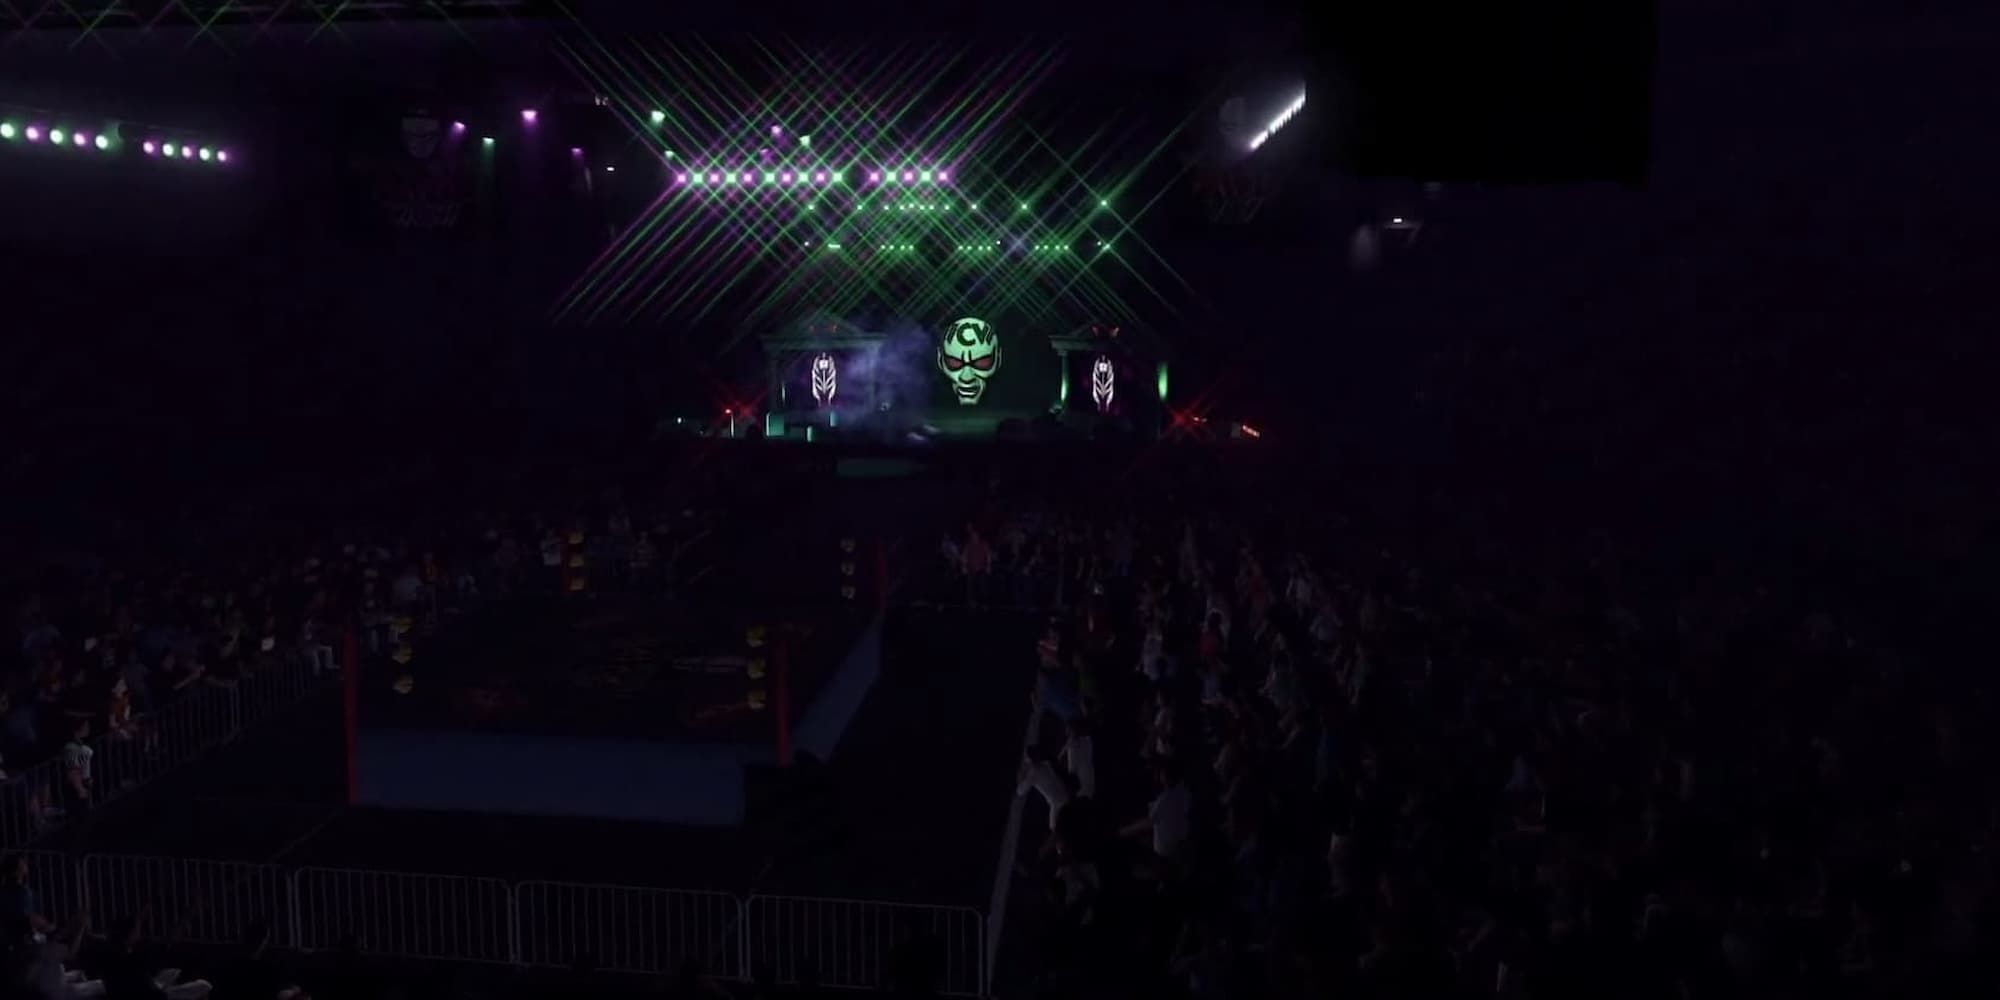 The Halloween Havoc arena in WWE 2K23 shows Rey Mysterio's face on the side screens and is packed with a crowd.